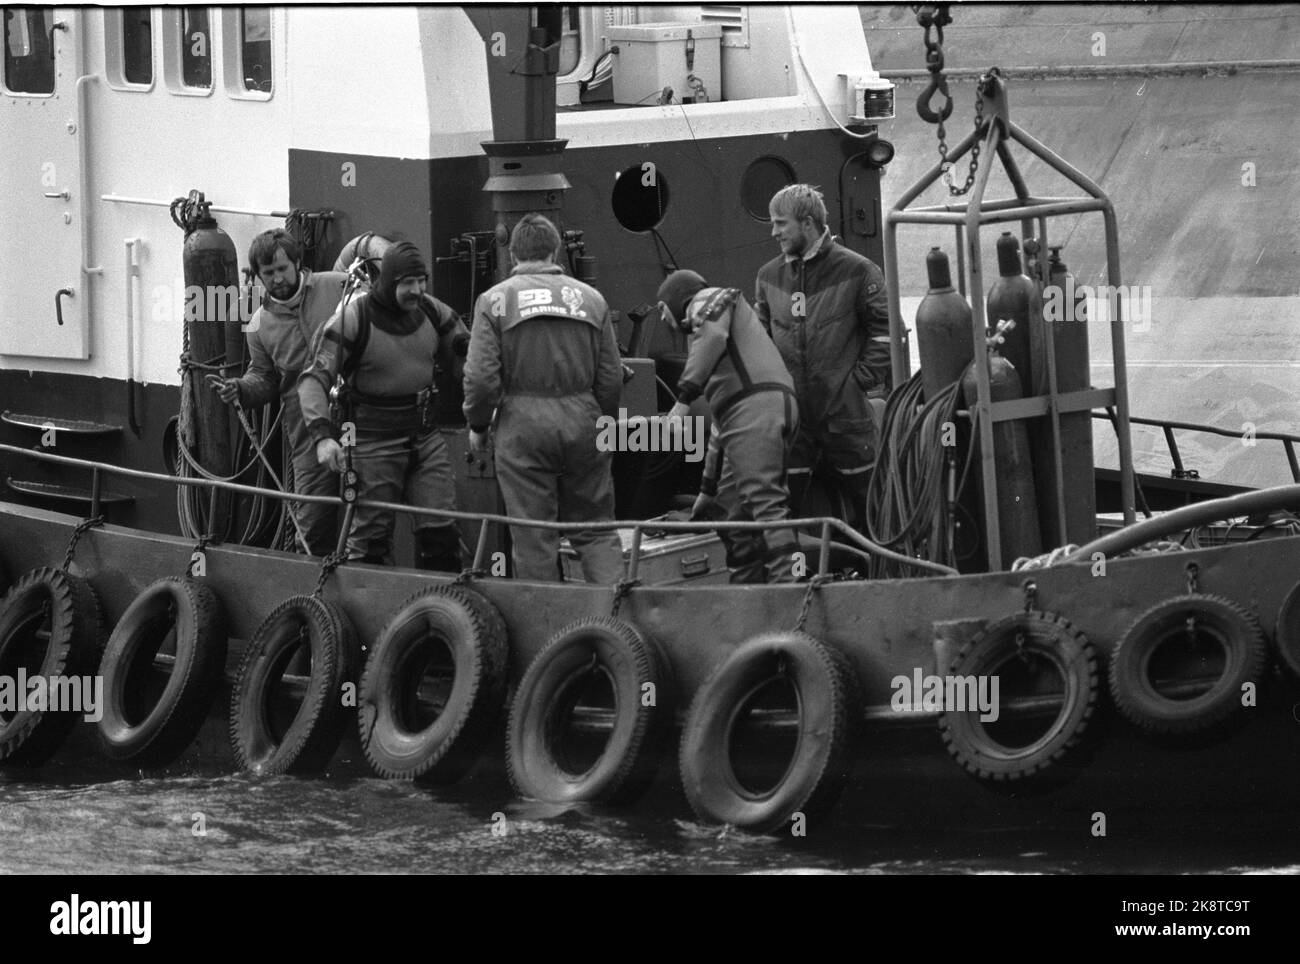 Stavanger 19851105: The cement vessel Concem crashed during the work on Gullfaks B Platform in the Gandsfjord, and 10 people perished. Ships with divers are looking for those killed. Here divers on board auxiliary vessels. Photo: Jens O. Kvale / NTB / NTB Stock Photo